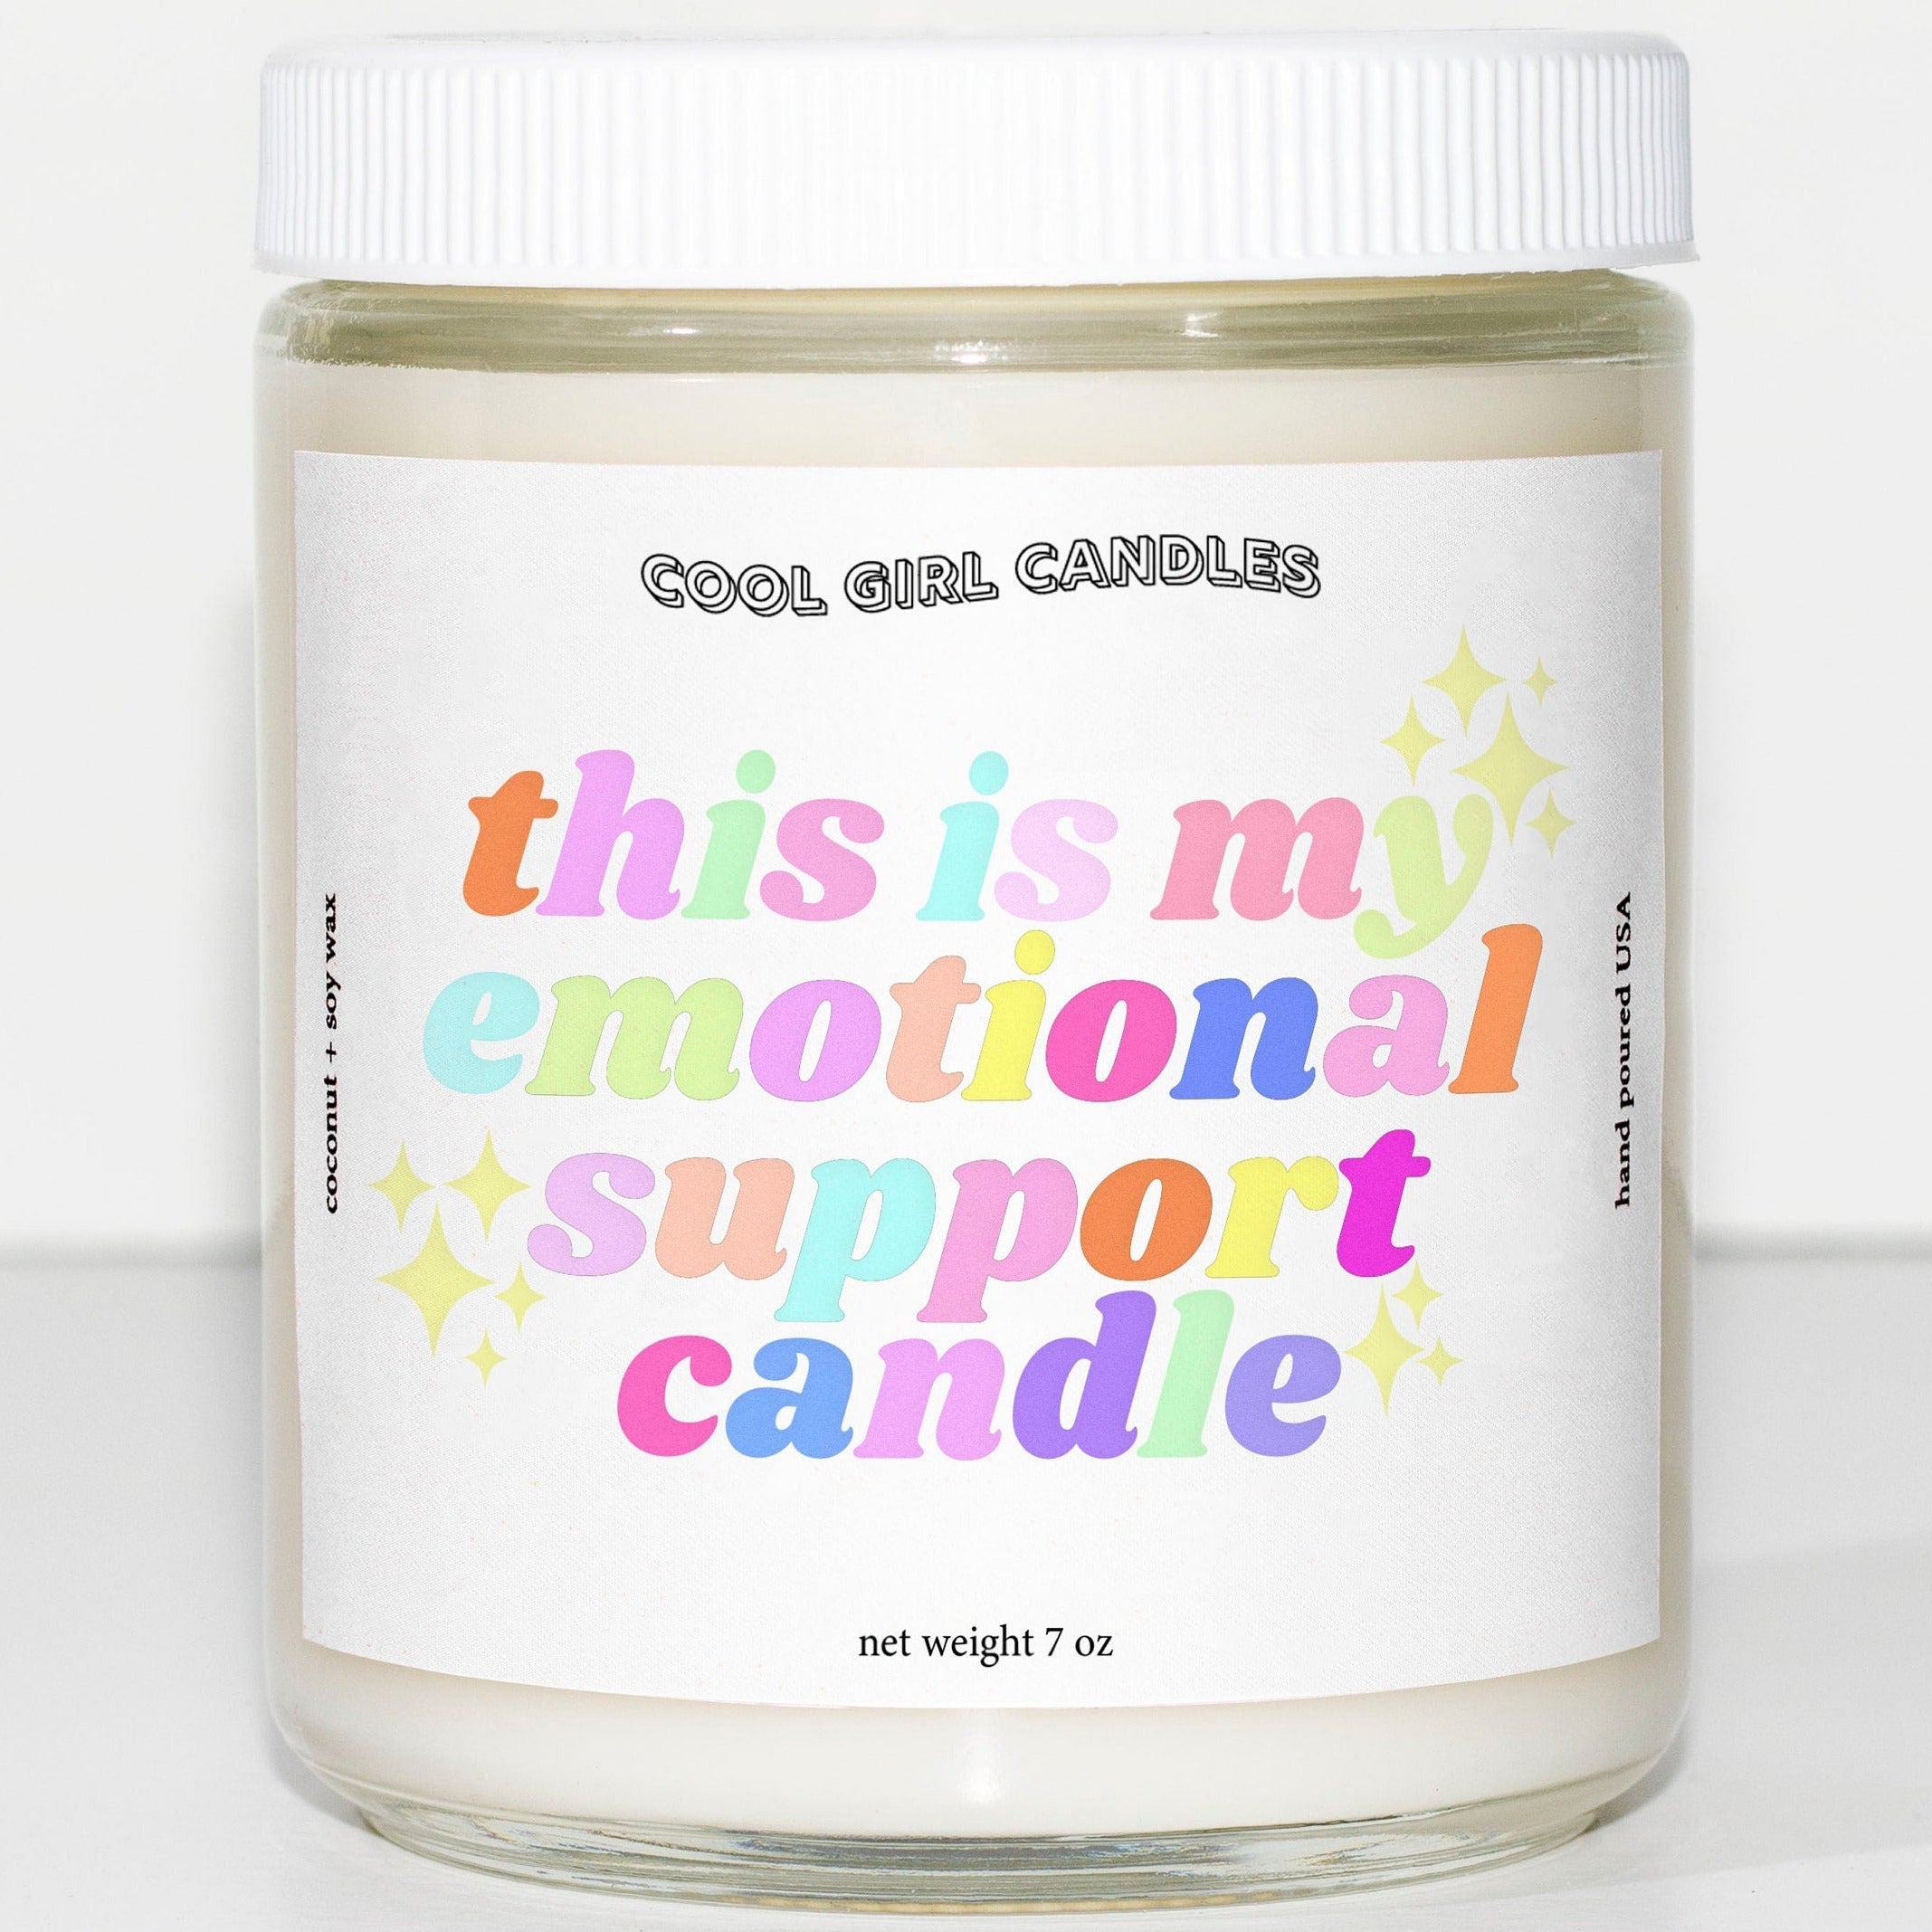 Favorite Child Candle – Cool Girl Candles